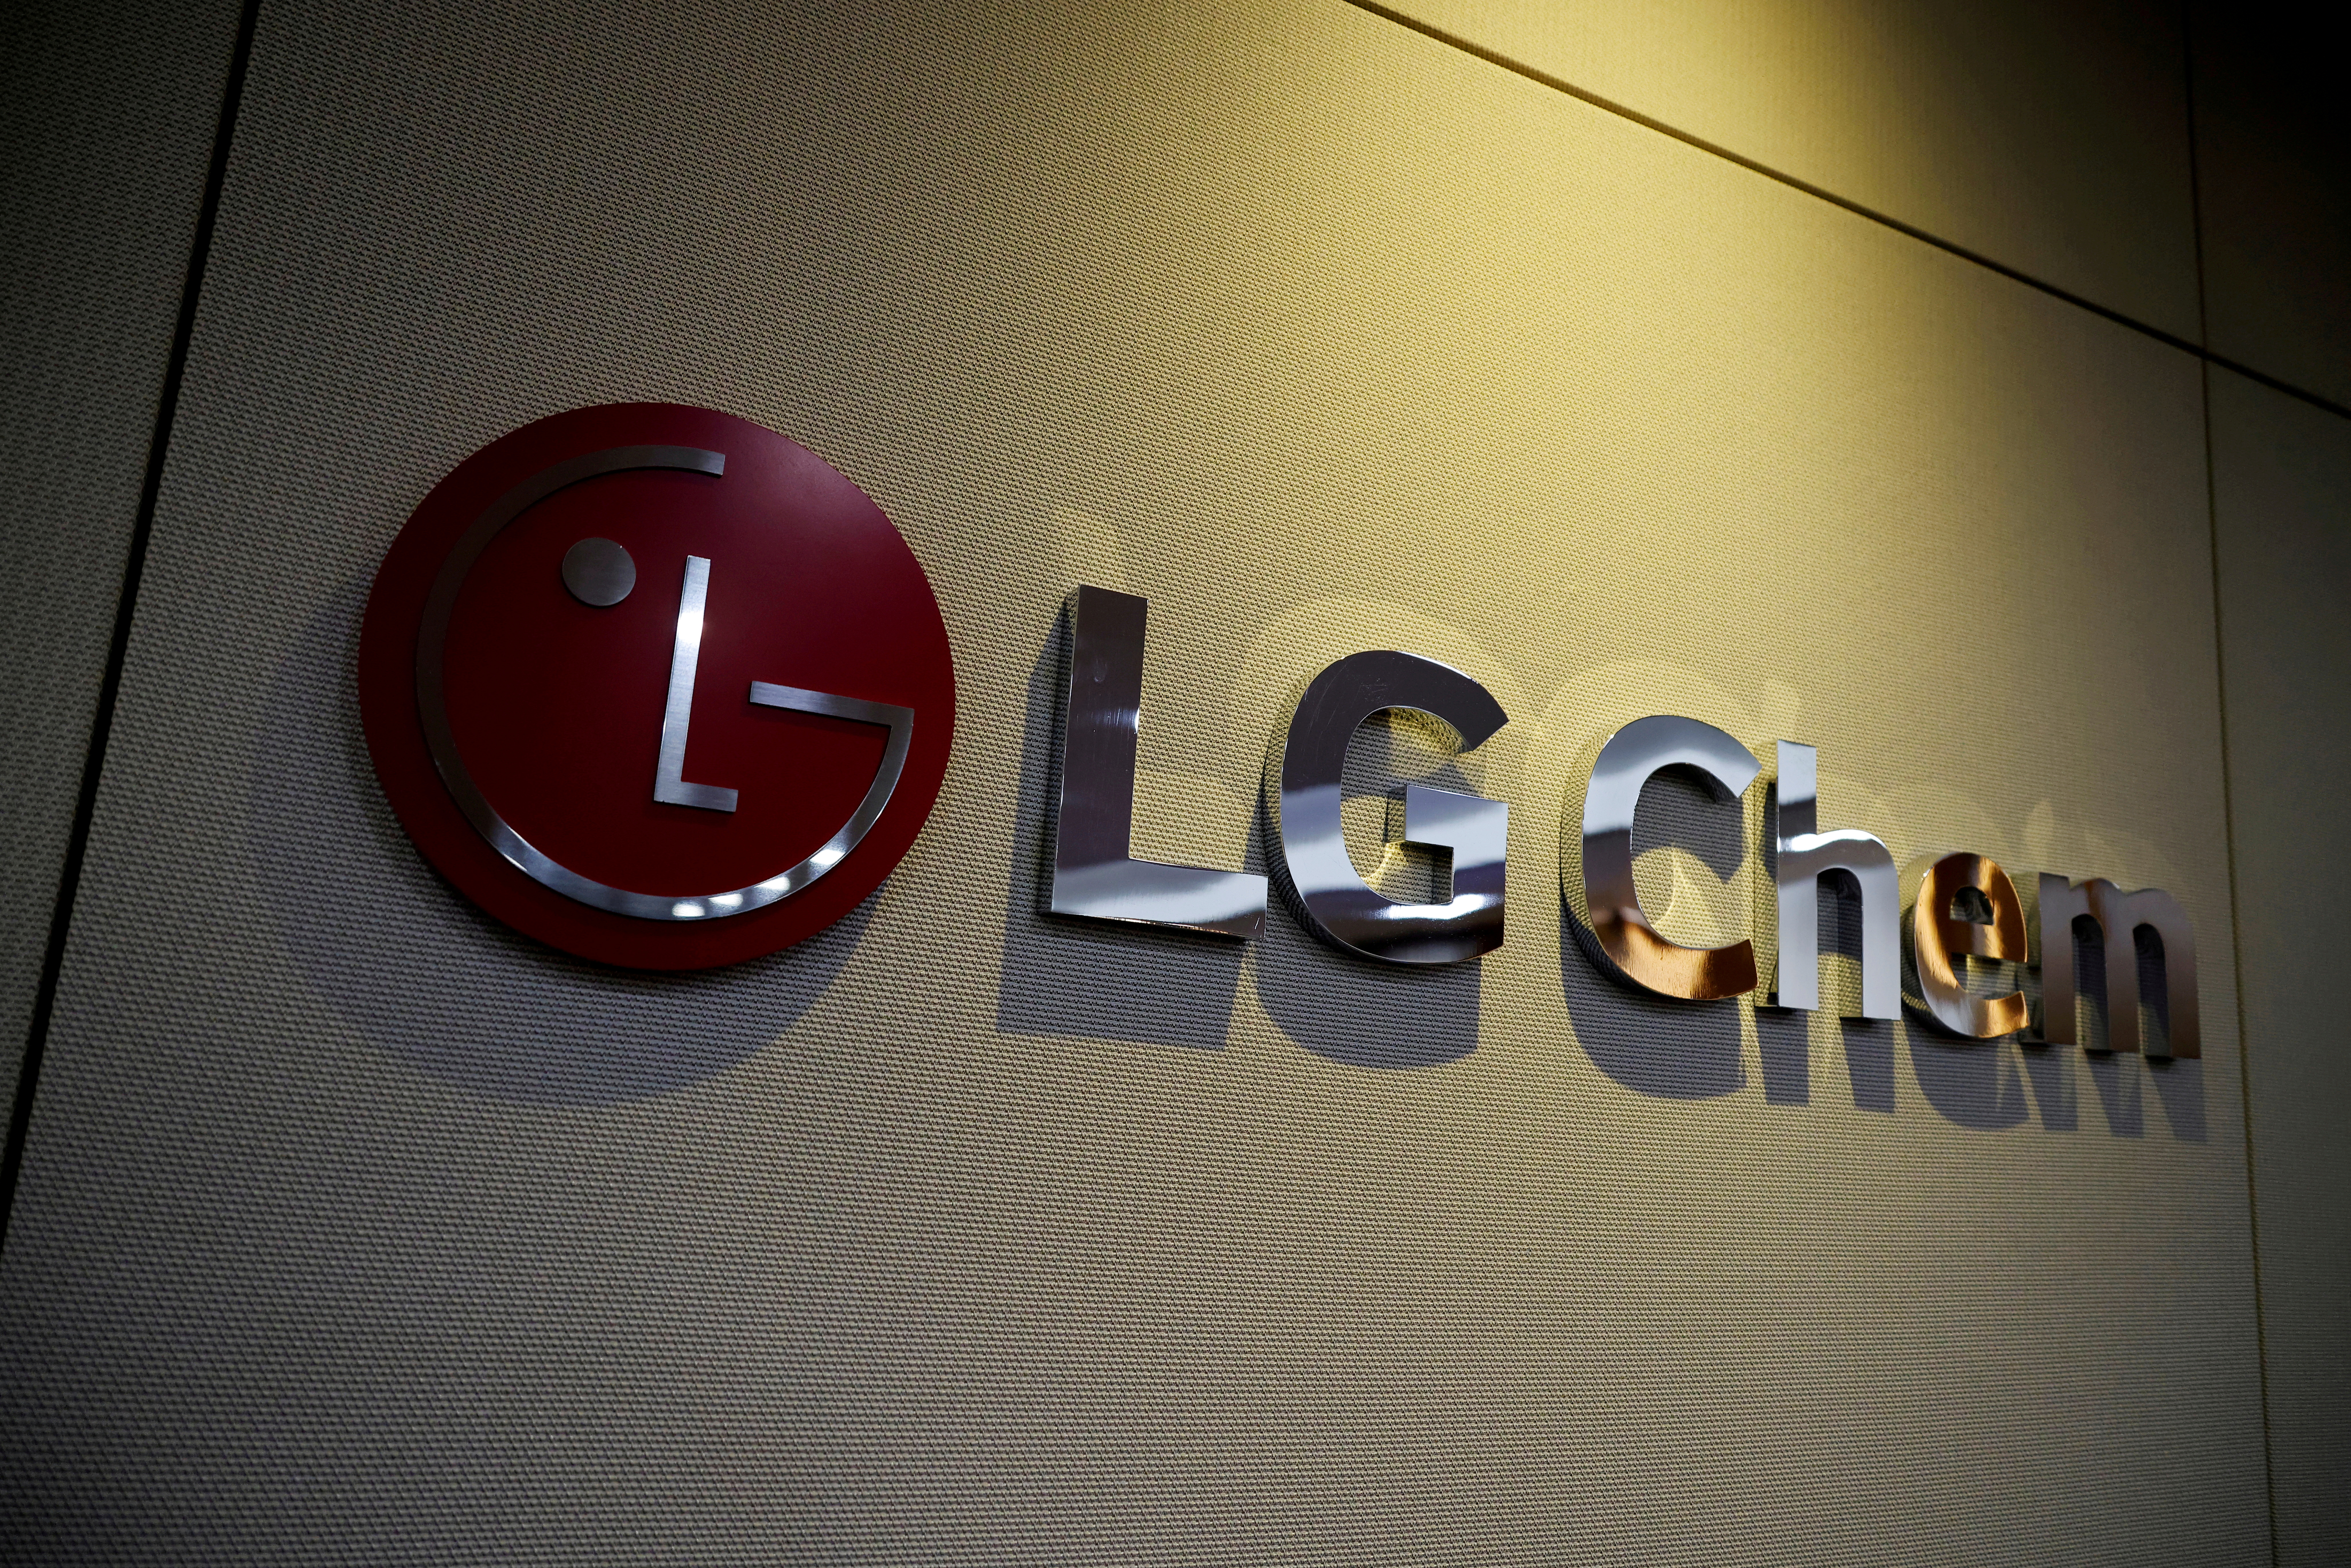 The logo of LG Chem is seen at its office building in Seoul, South Korea.   REUTERS/Kim Hong-Ji